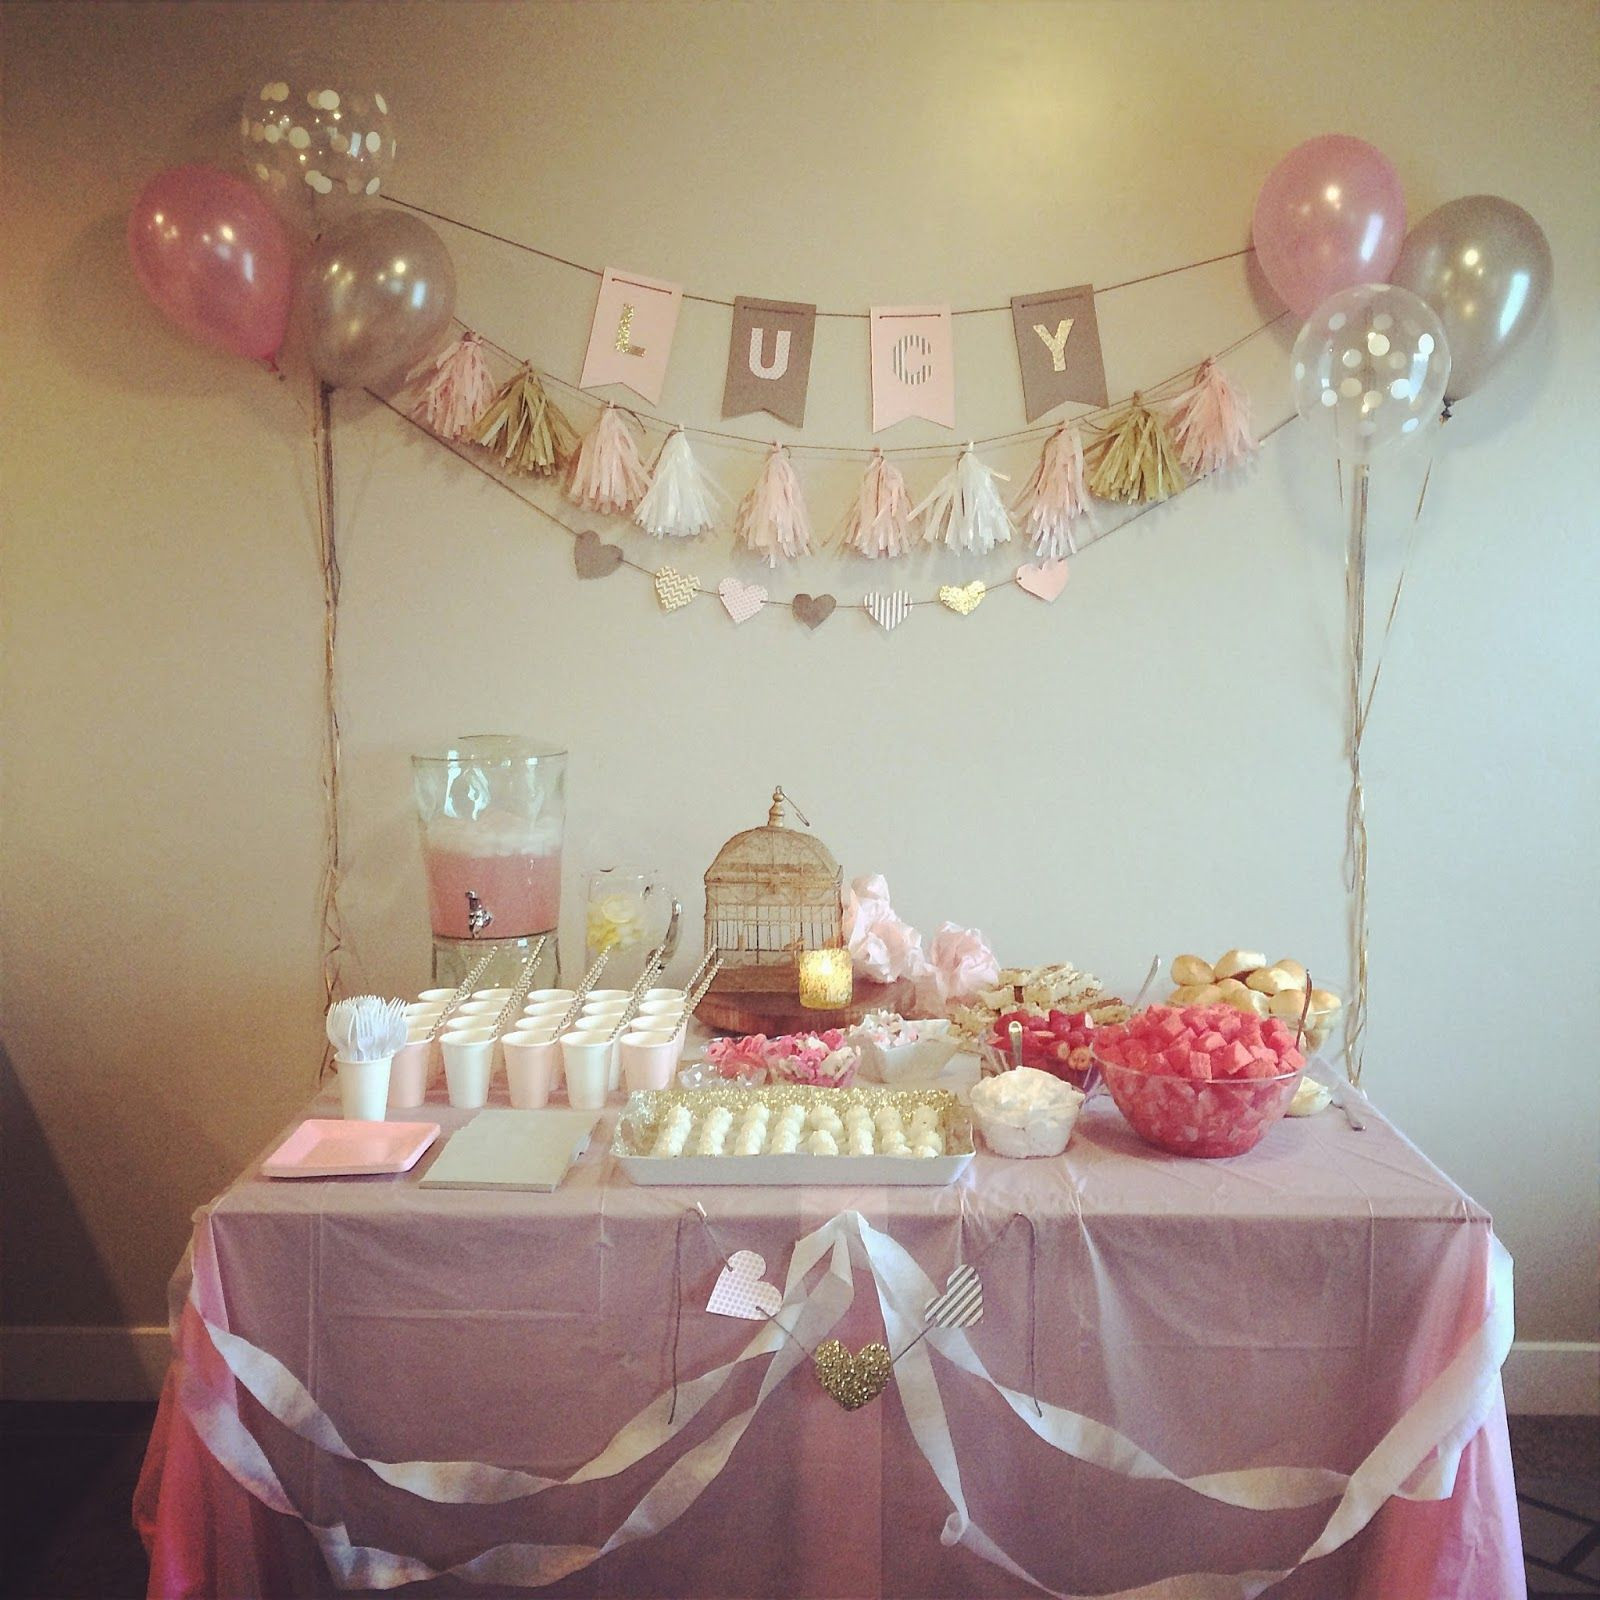 Baby Shower Decorating Ideas For A Girl
 Baby Shower on Bud How to throw a baby shower for